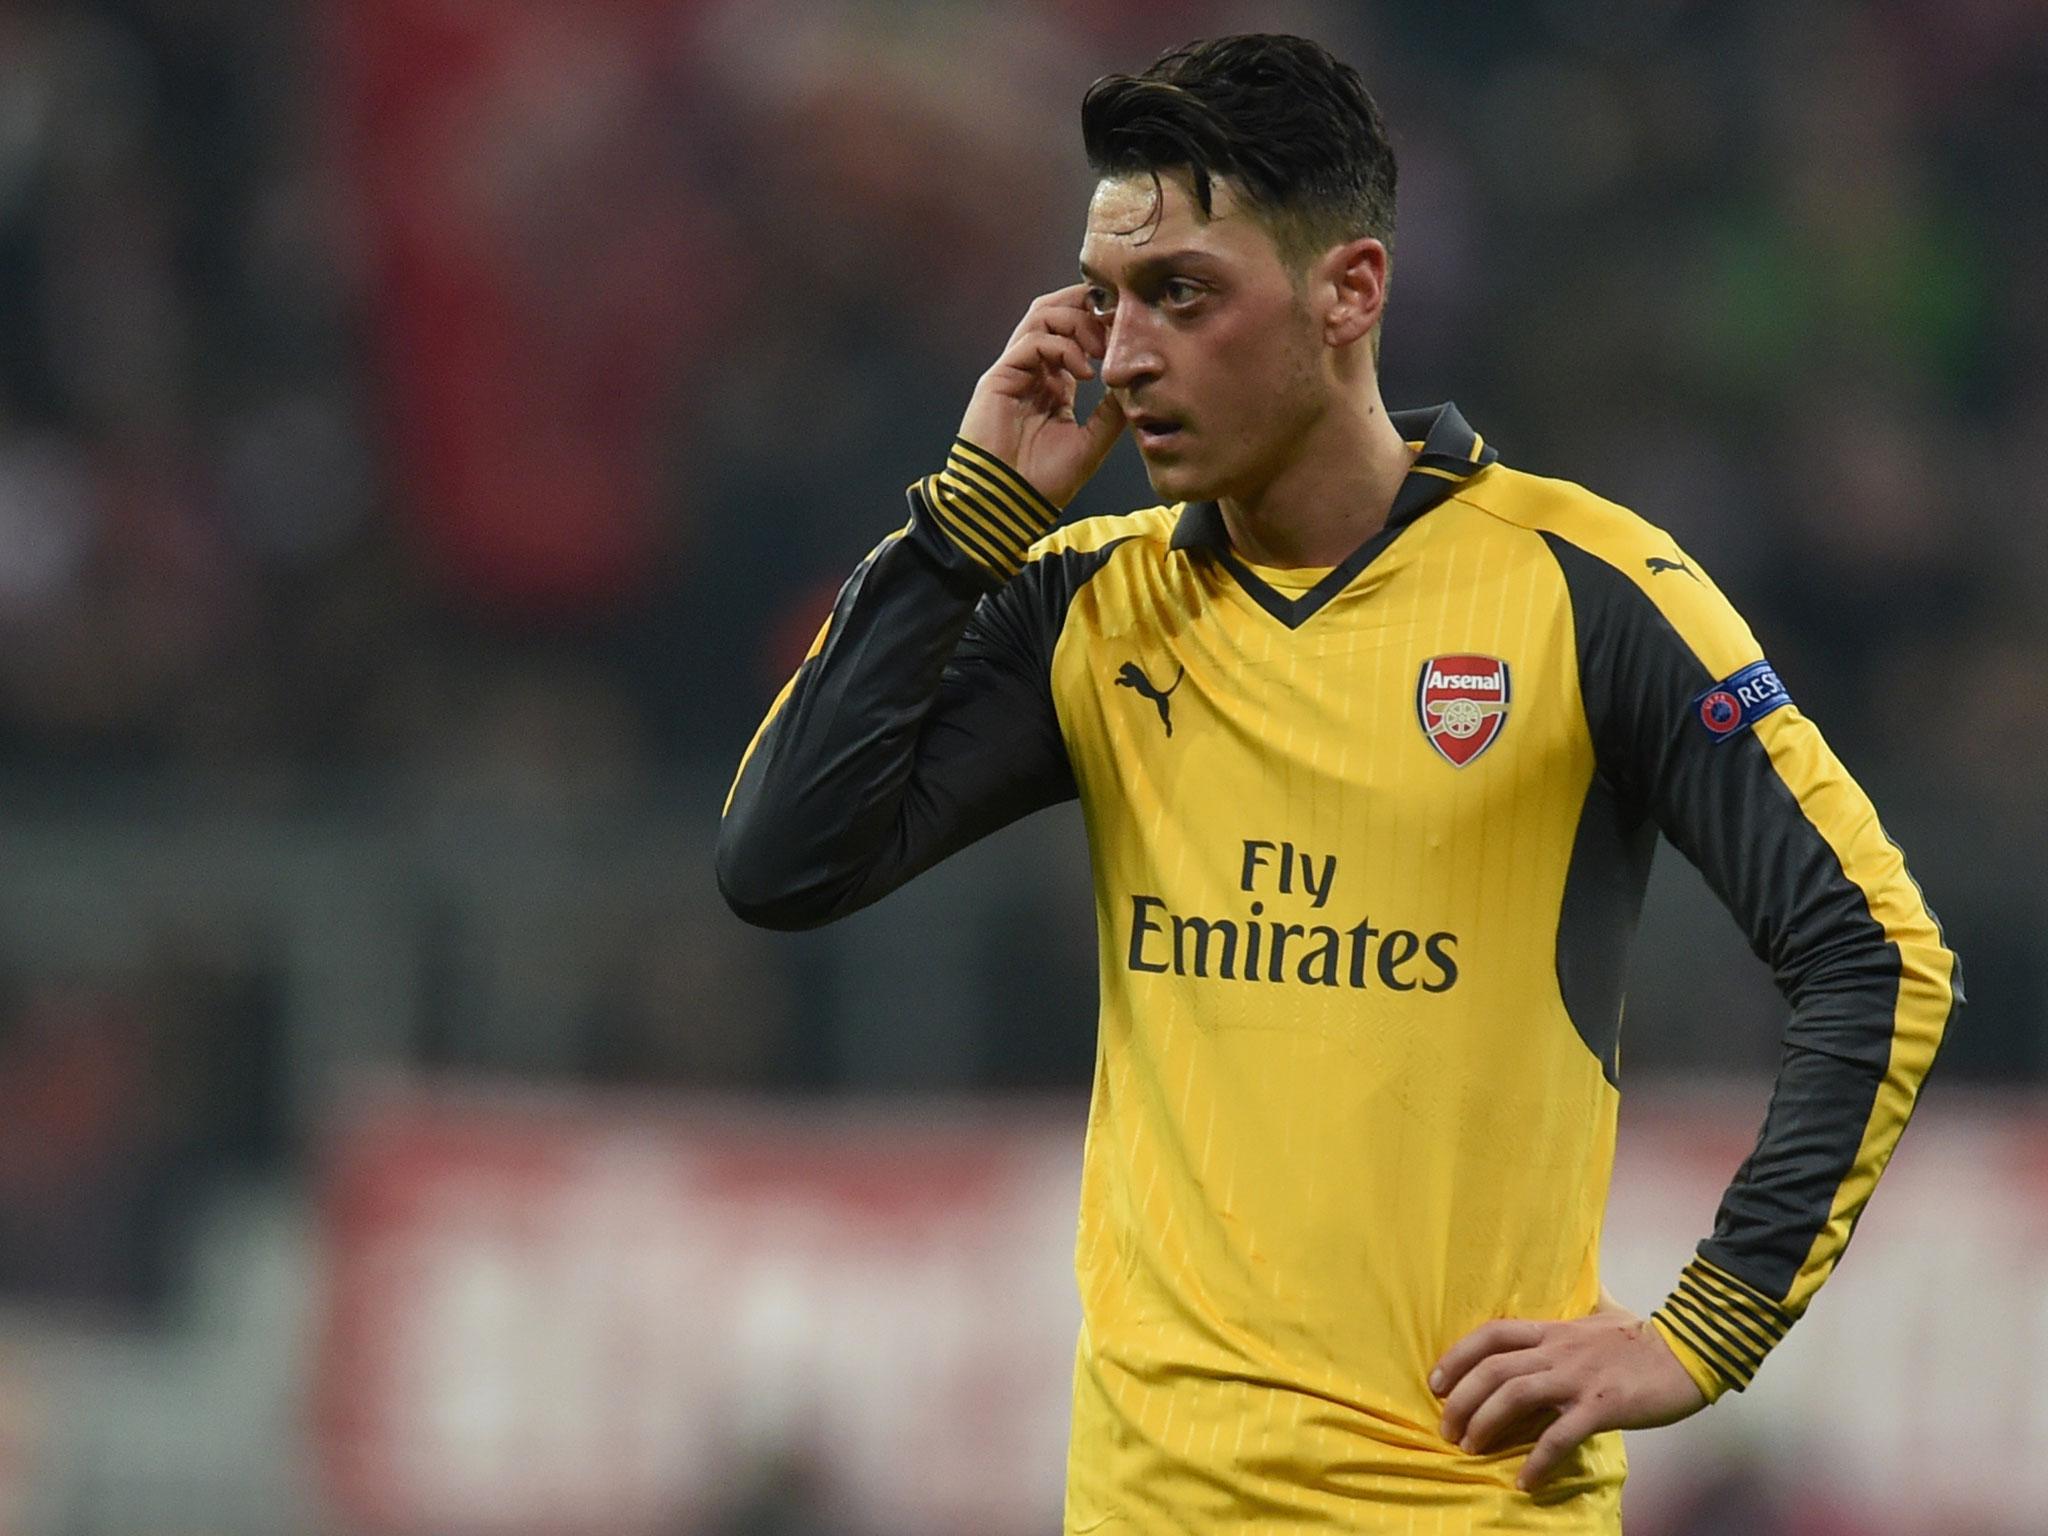 Mesut Ozil was set to be dropped against Liverpool anyway